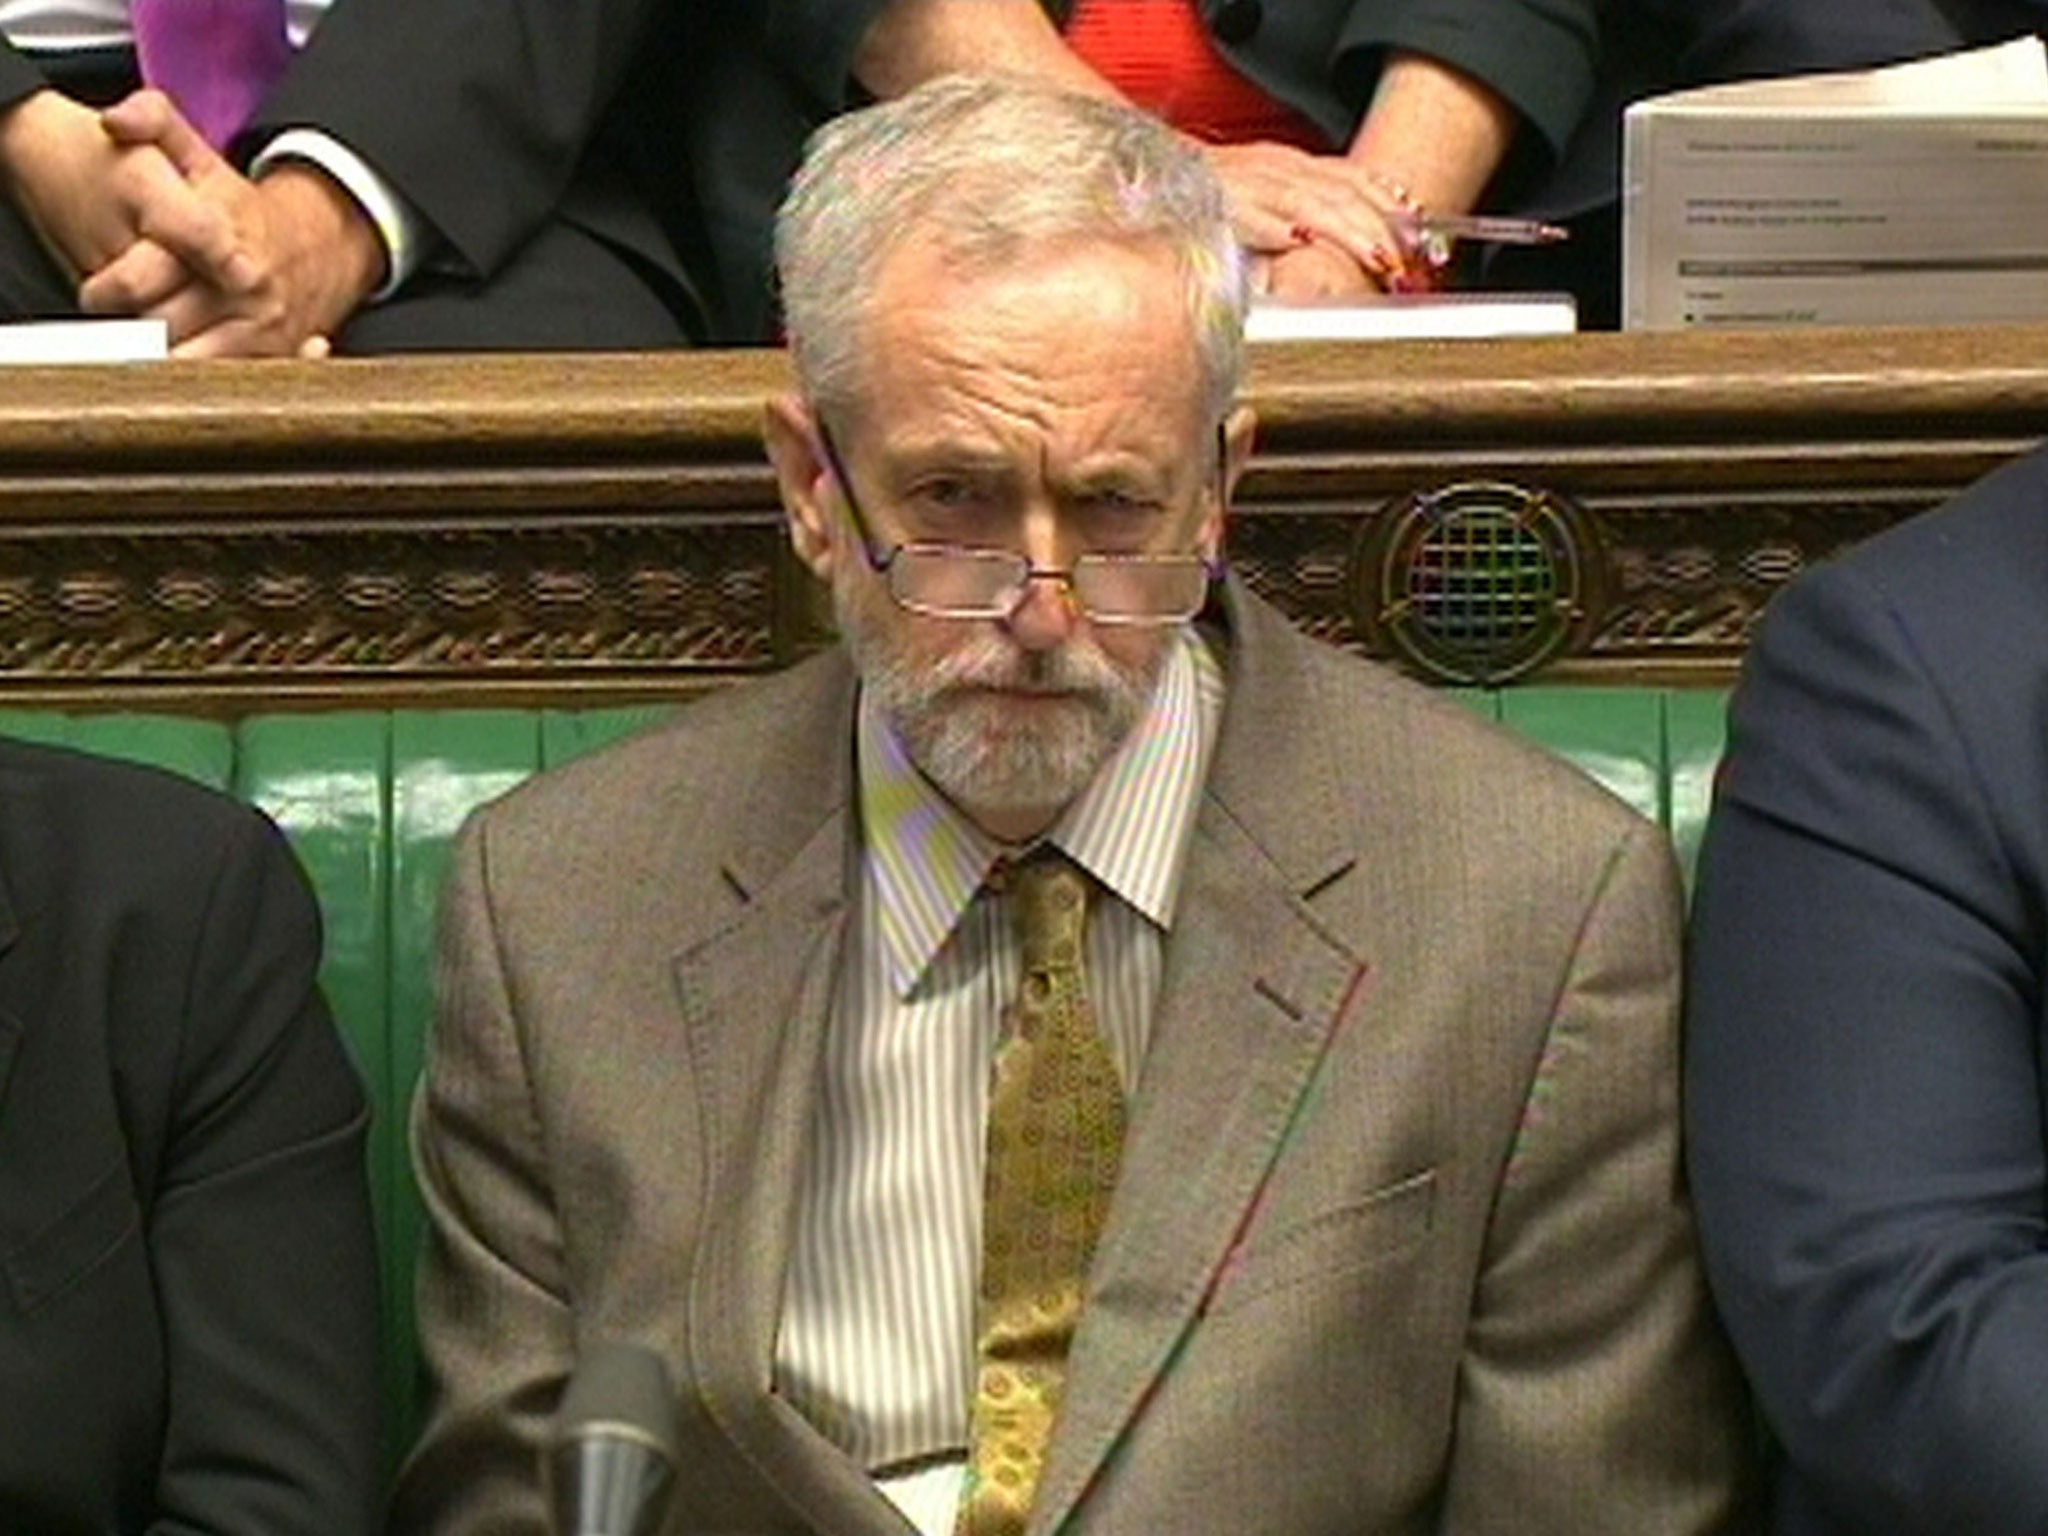 Labour party leader Jeremy Corbyn during his first Prime Minister's Questions in the House of Commons